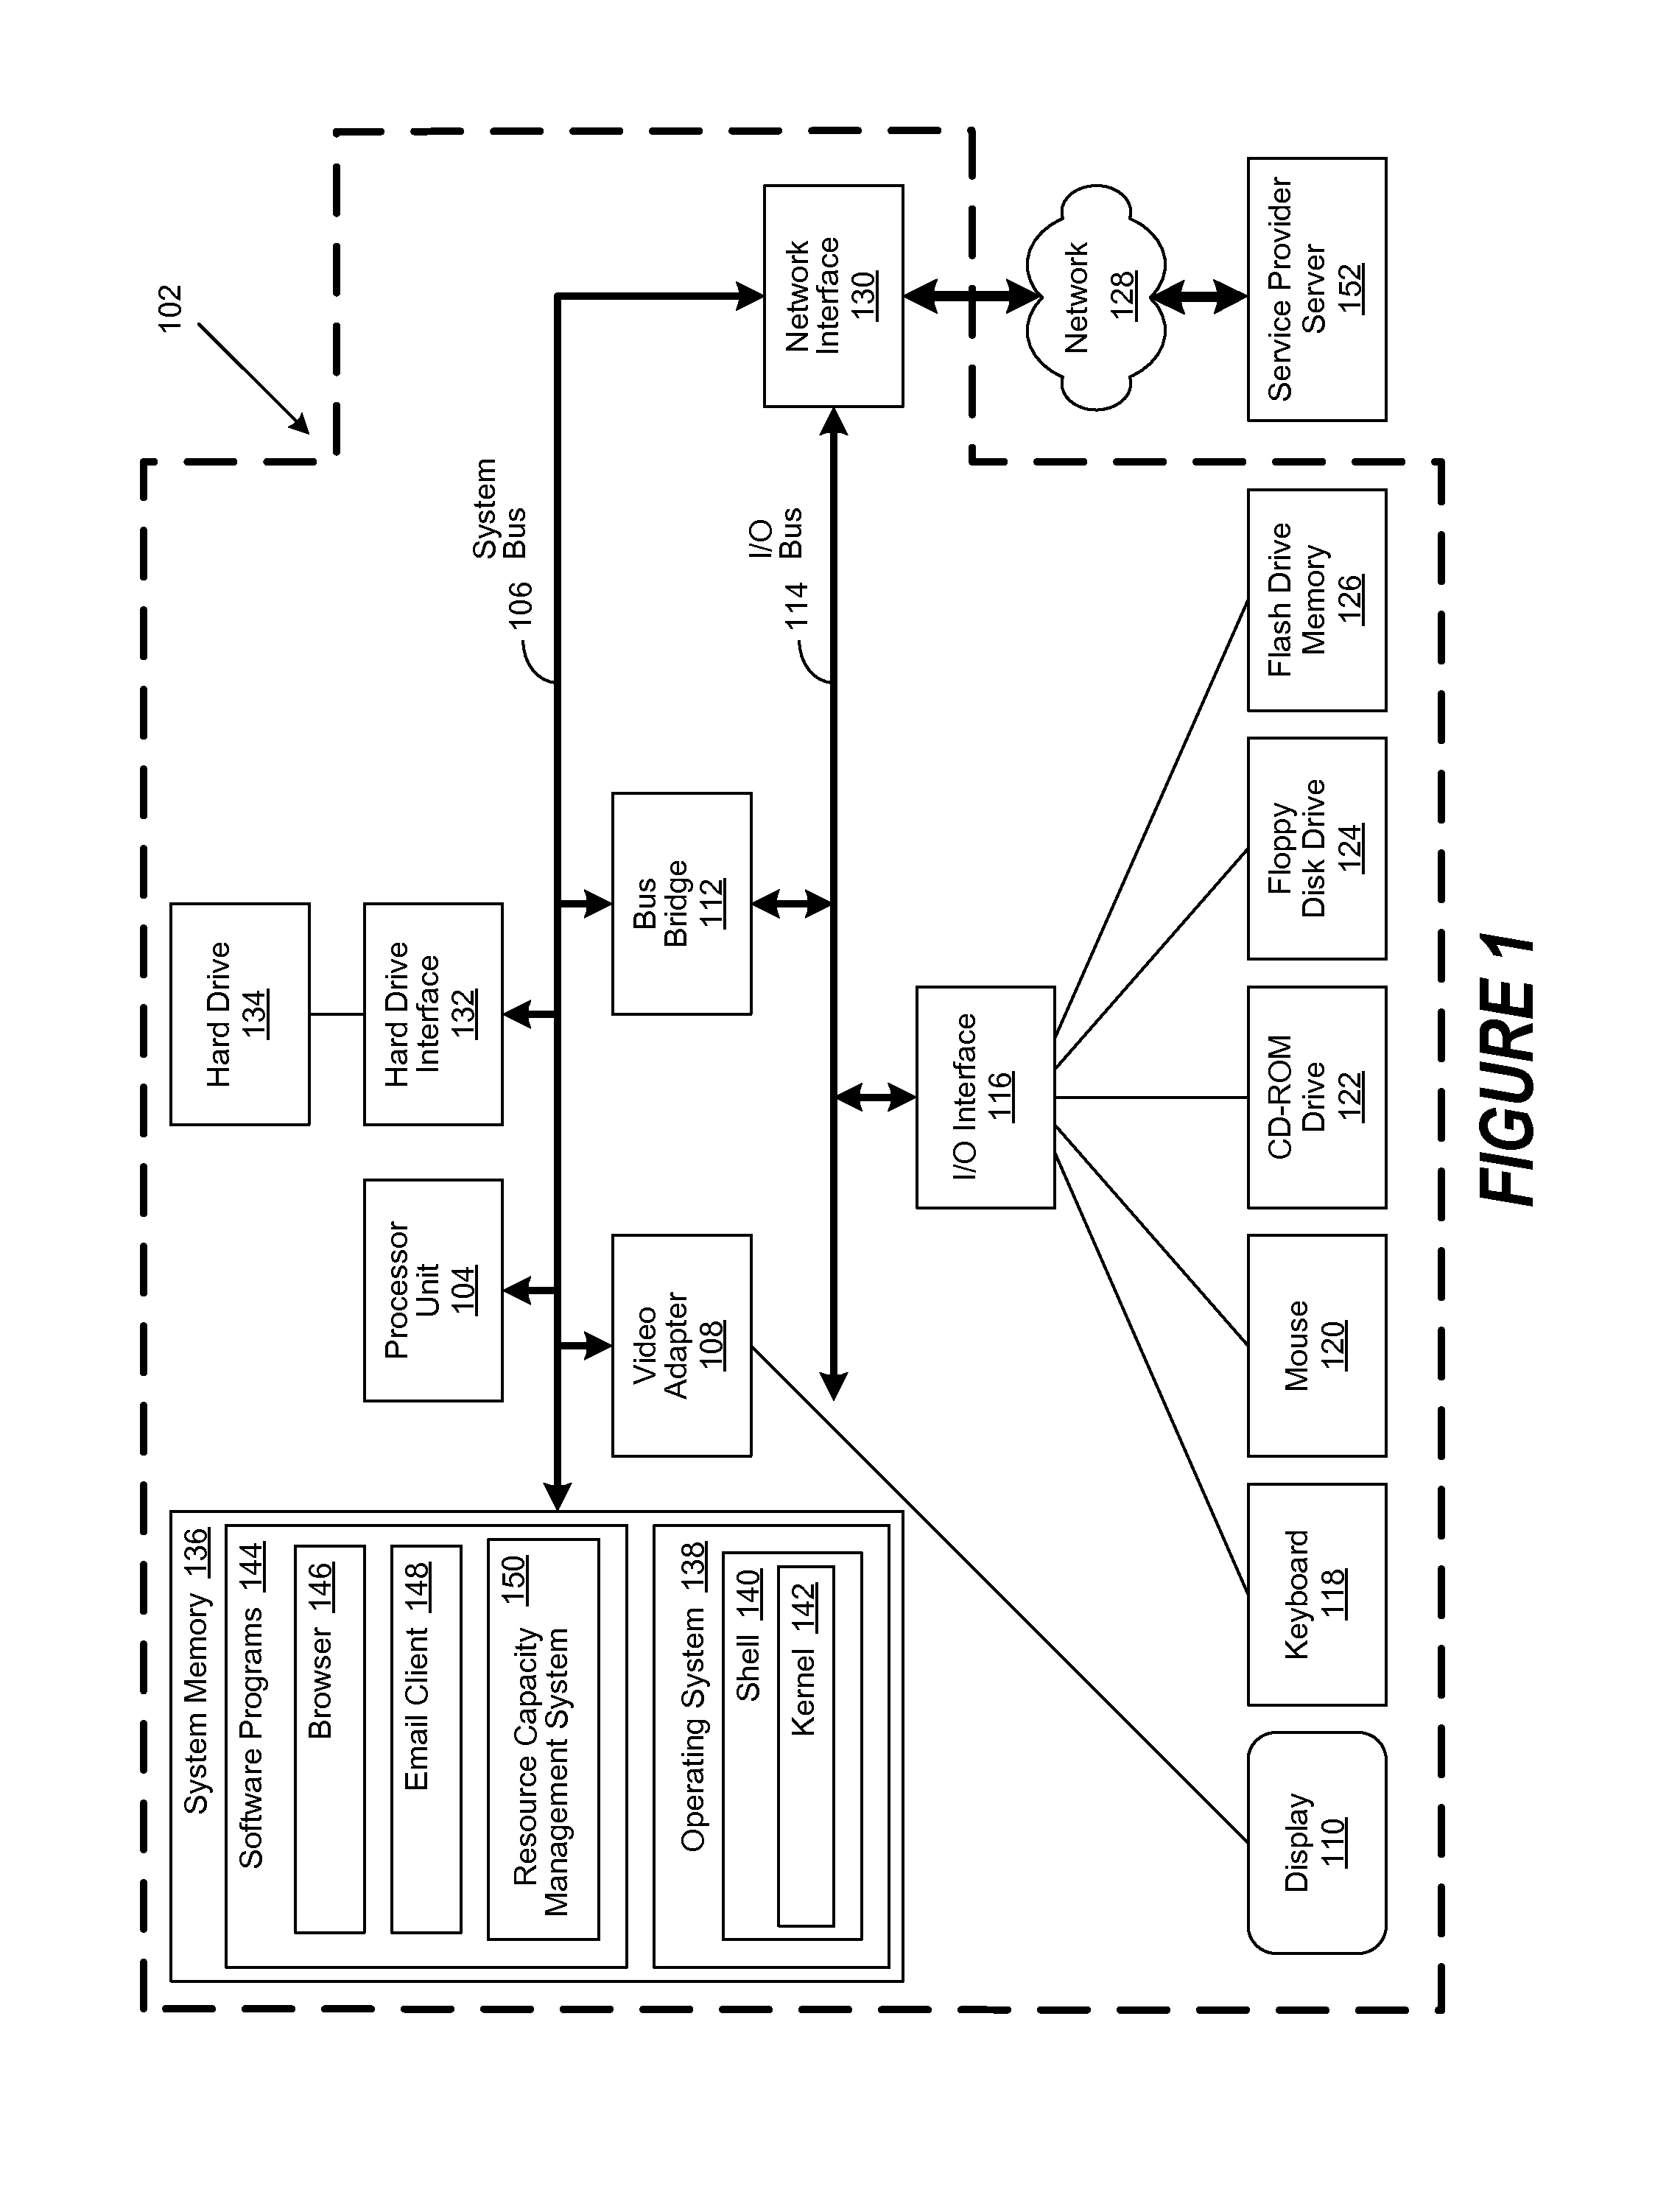 Method and System for Managing Resource Capability in a Service-Centric System